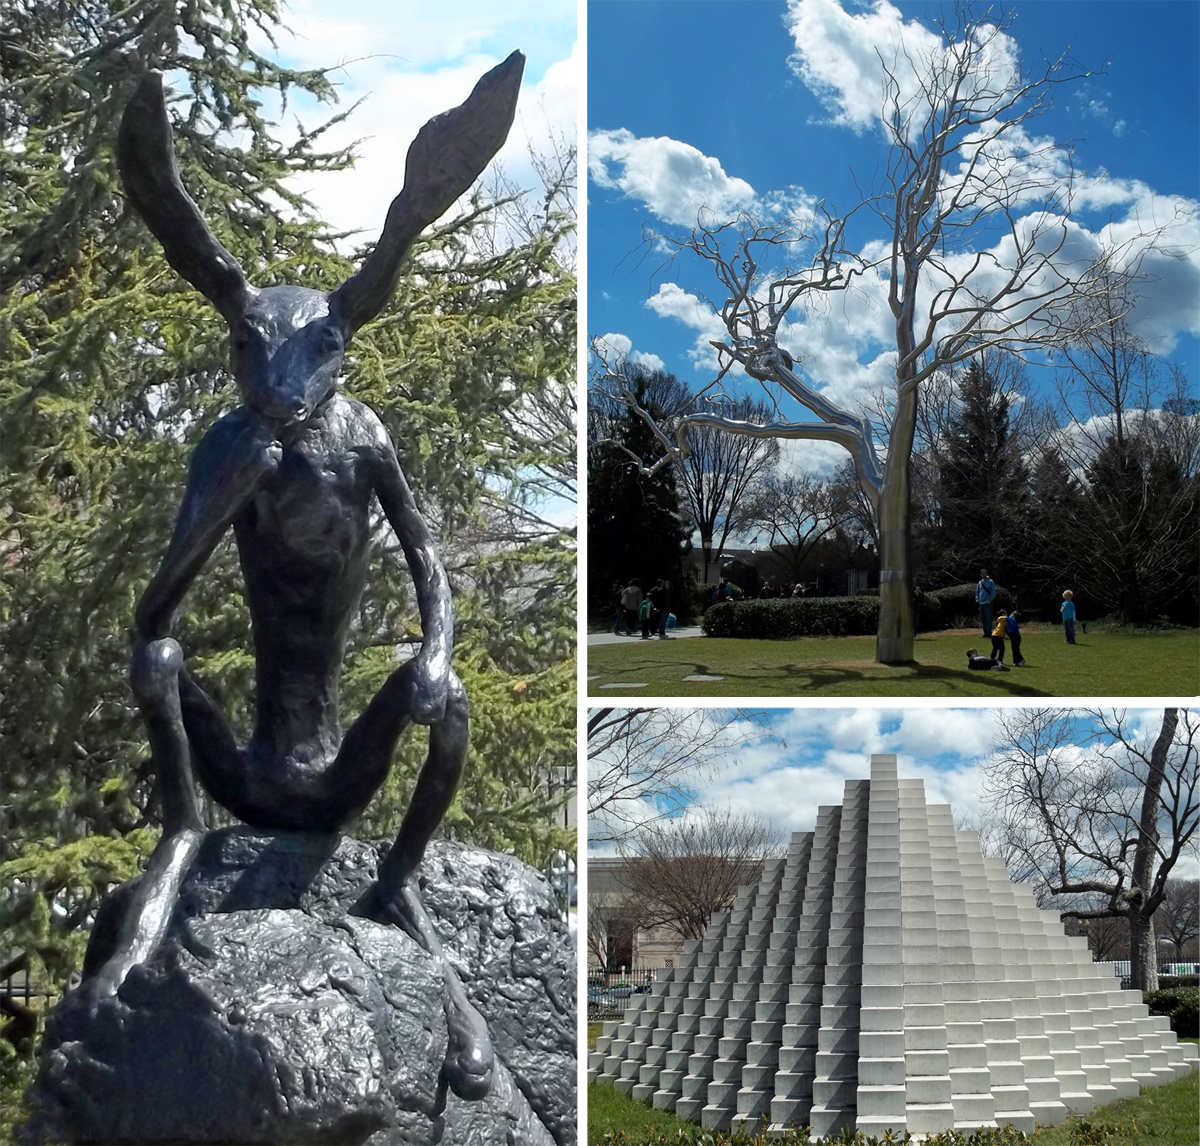 (Left) Barry Flanagan, Thinker on a Rock, 1997 (Upper Right) Roxy Paine, Graft, 2008–2009 (Lower Right) Sol LeWitt, Four-Sided Pyramid, first installation 1997, fabricated 1999